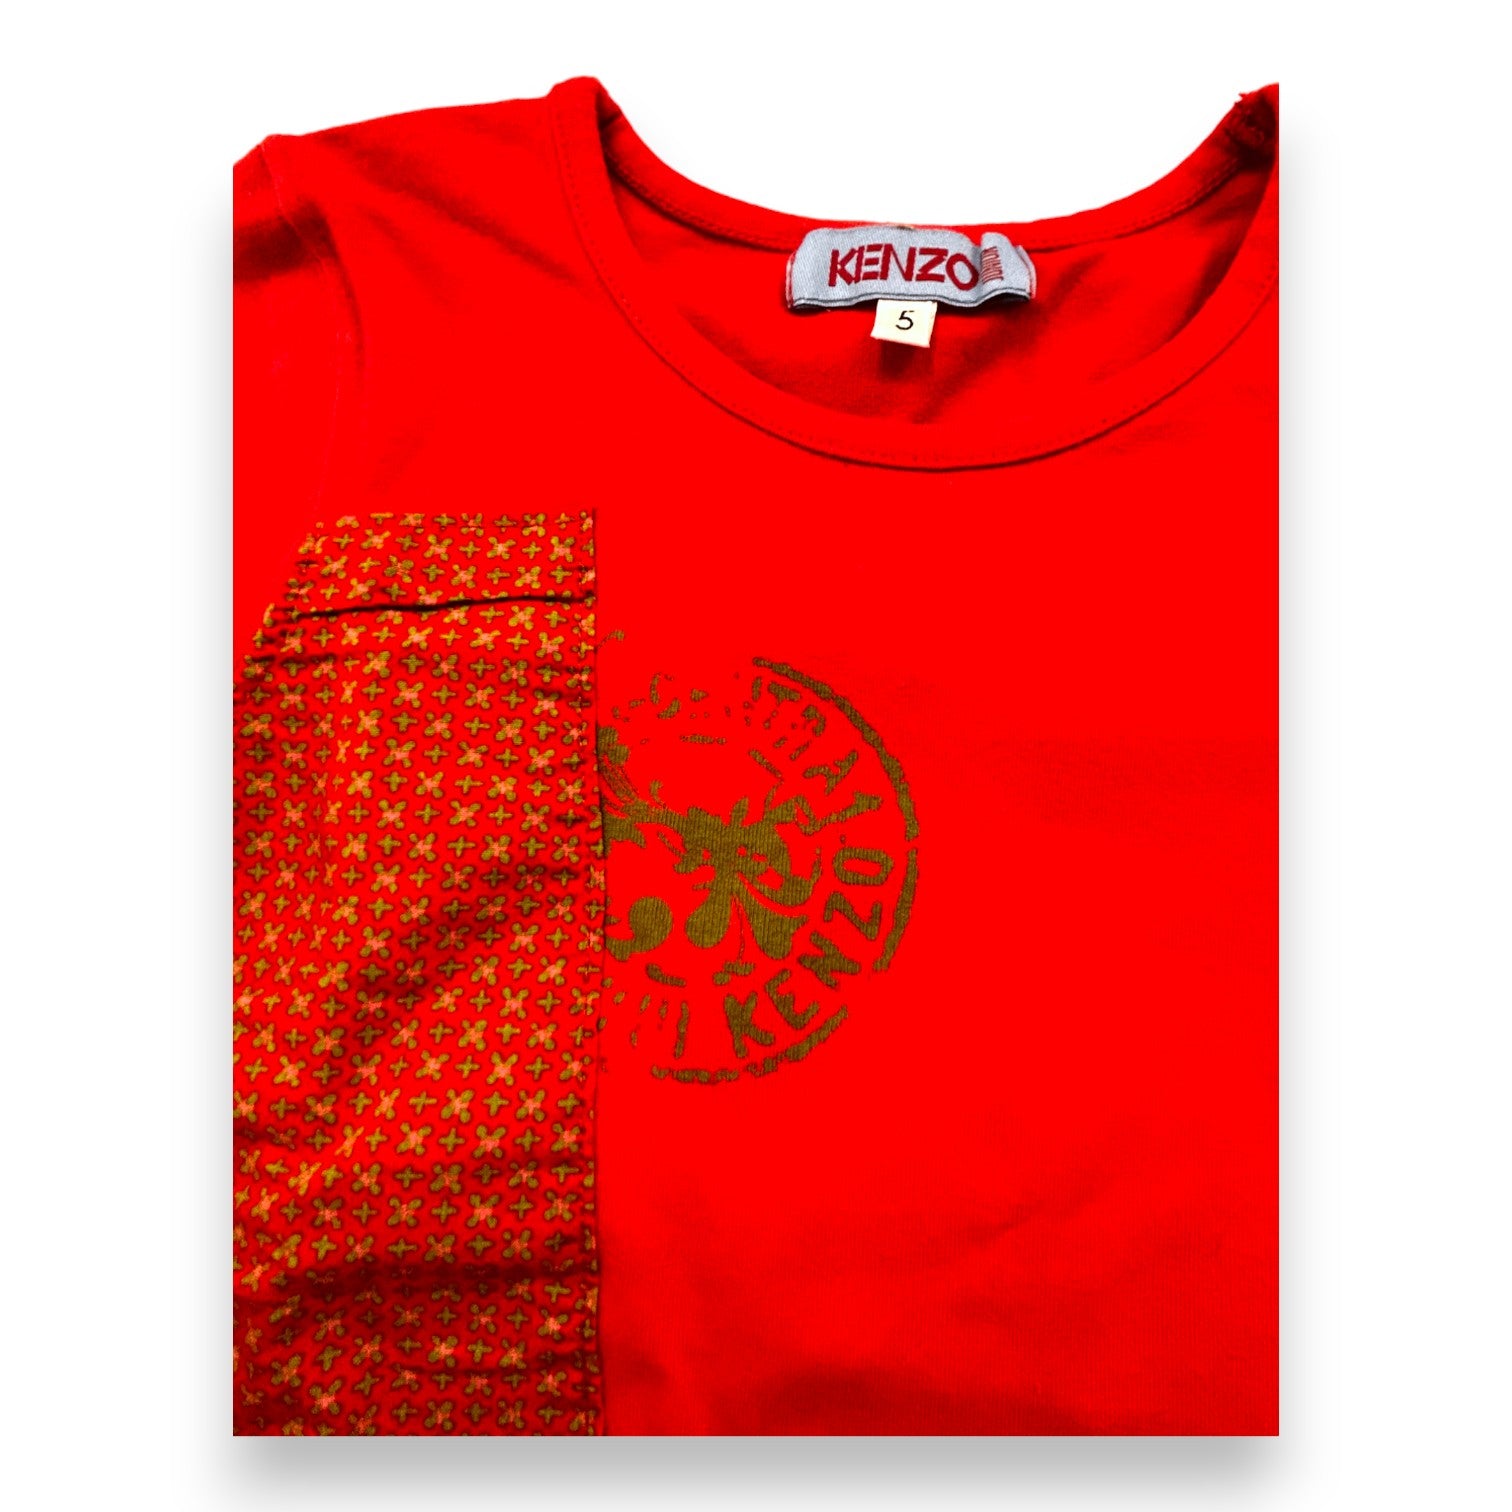 KENZO - T-shirt manches longues rouge - 5 ans